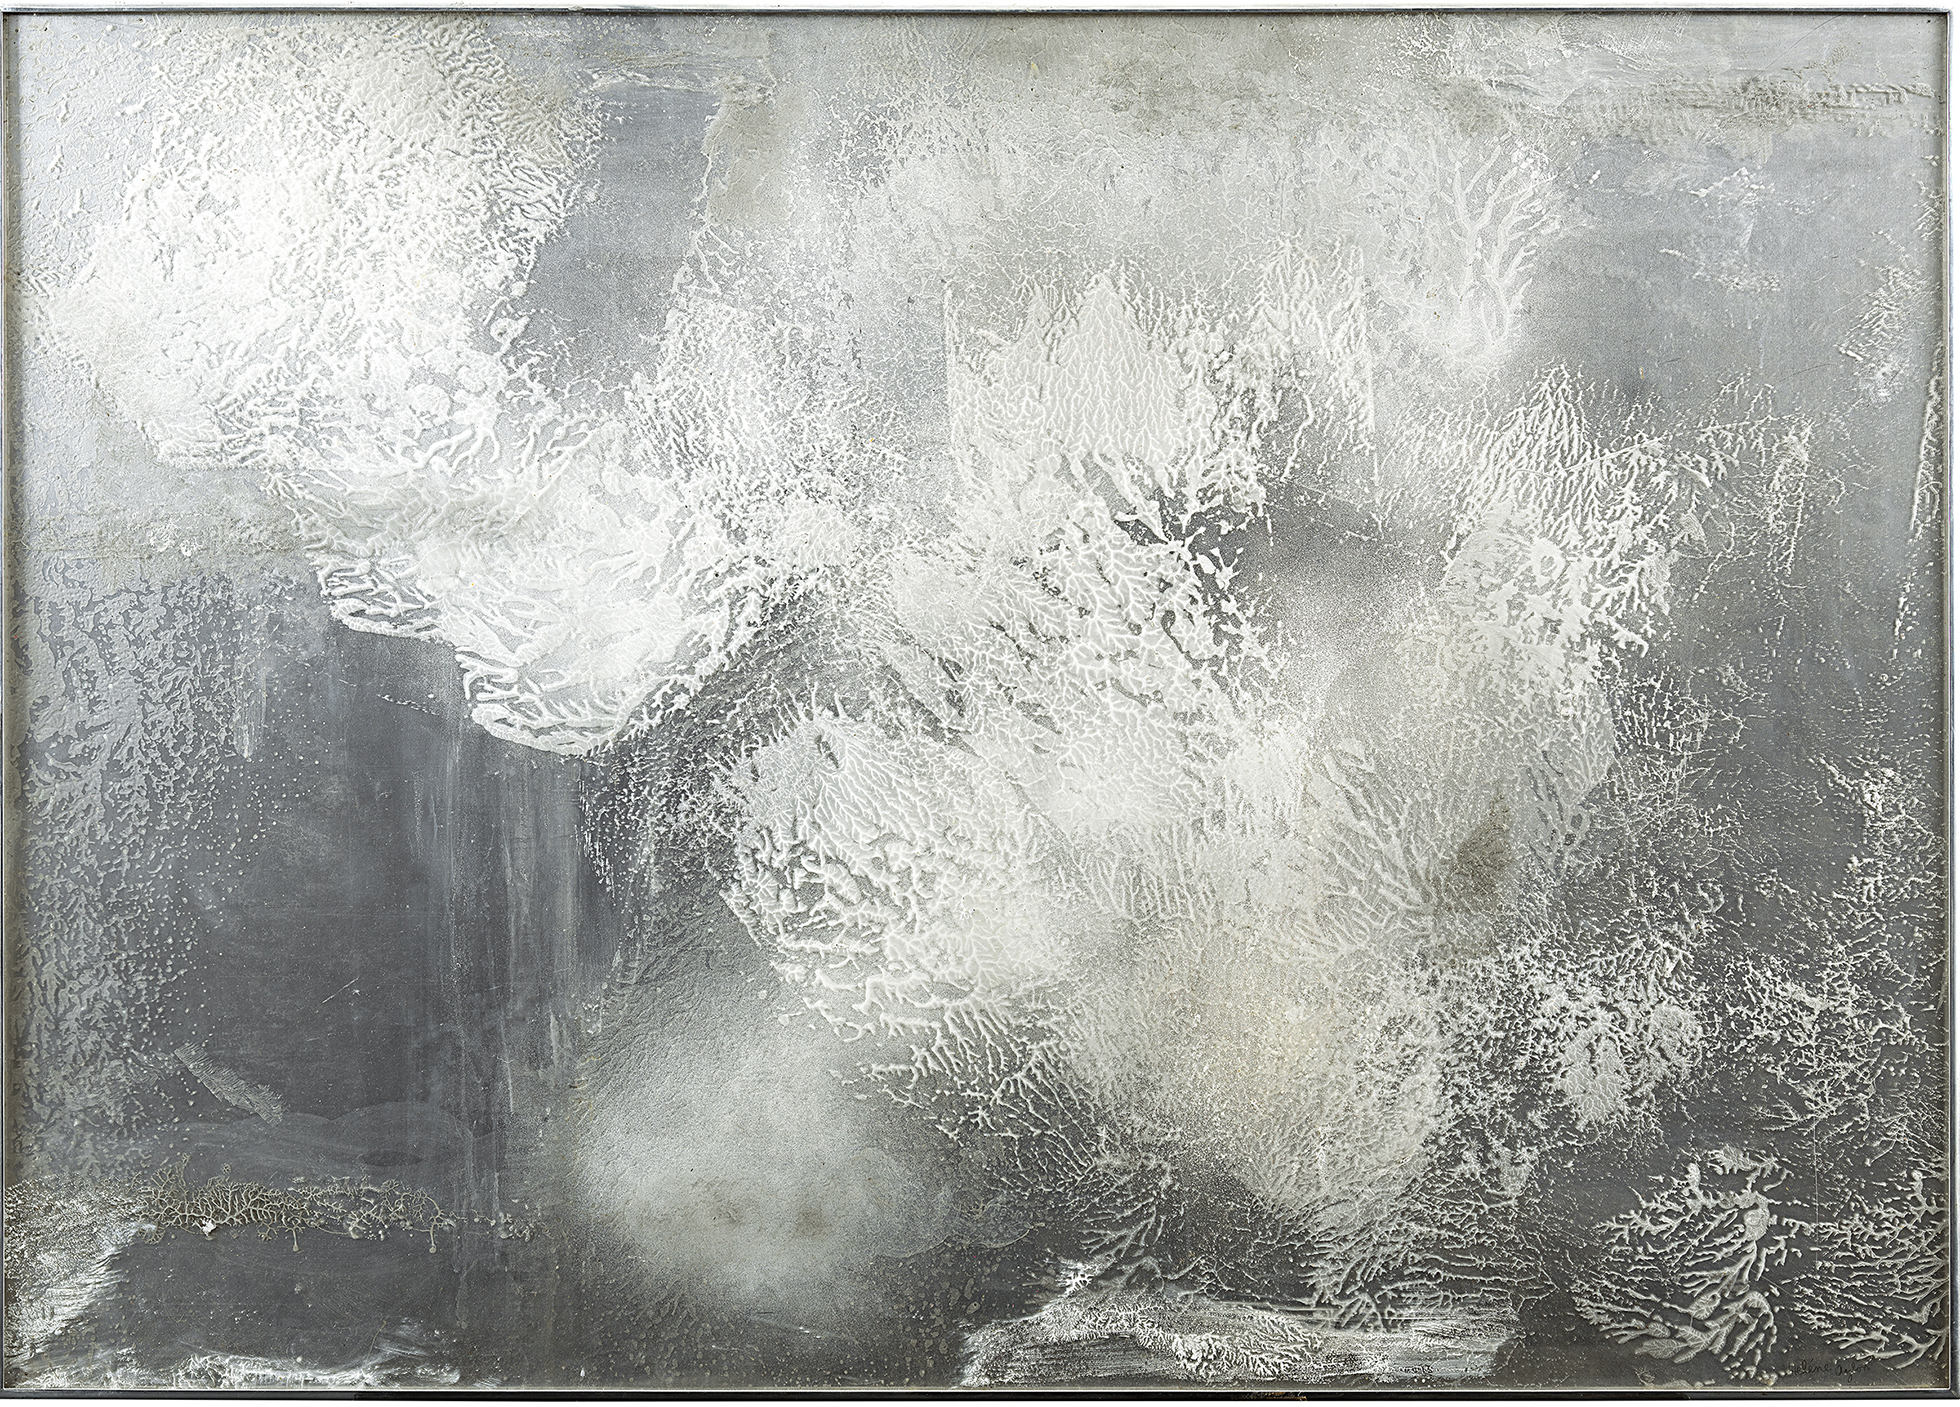 Abstract painting made using industrial materials such as aluminum, Plexiglas and spray paint, reflecting and refracting a white glow that changes visually with the viewer’s stance and the light conditions